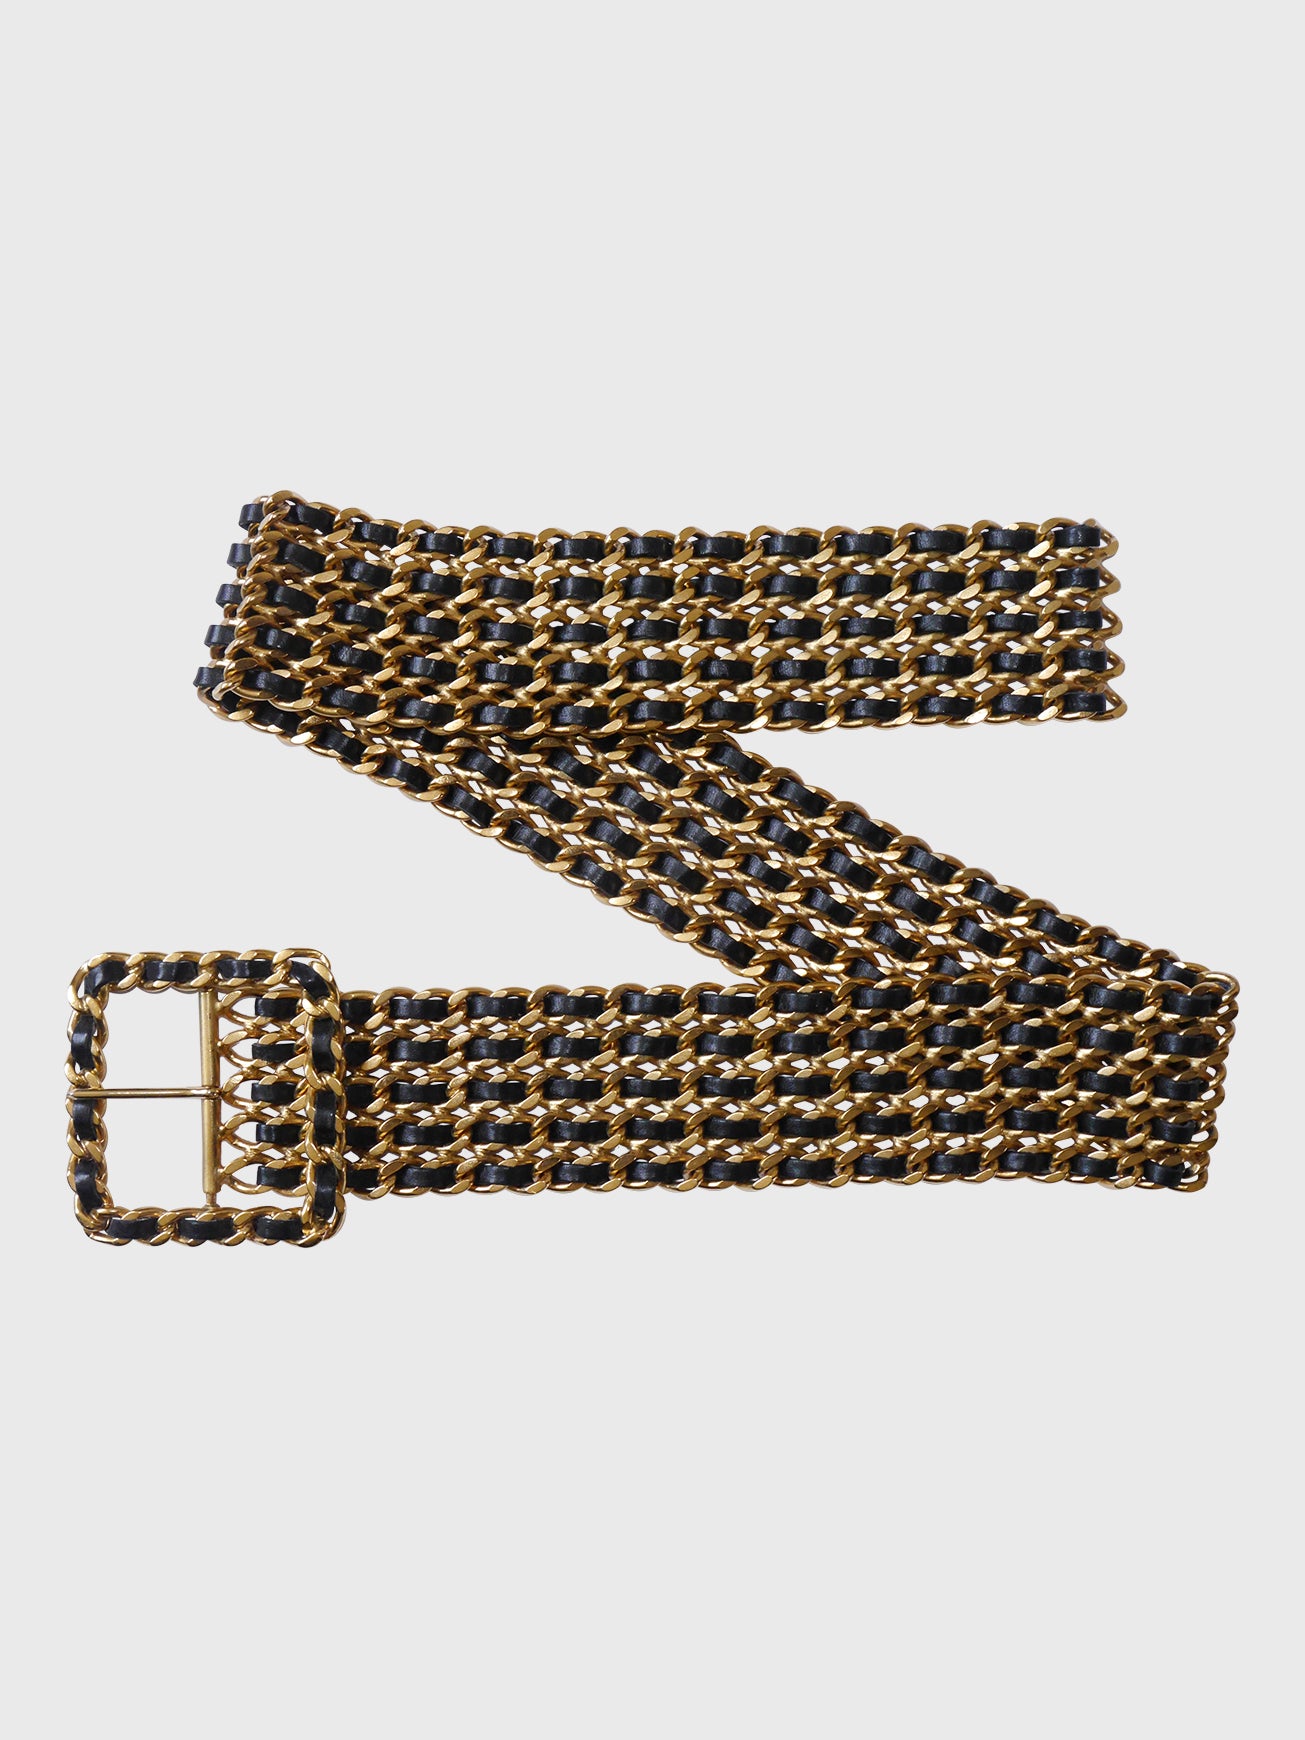 CHANEL Spring 1993 Multi-Strand Chain Belt As Modeled By Kate Moss ...